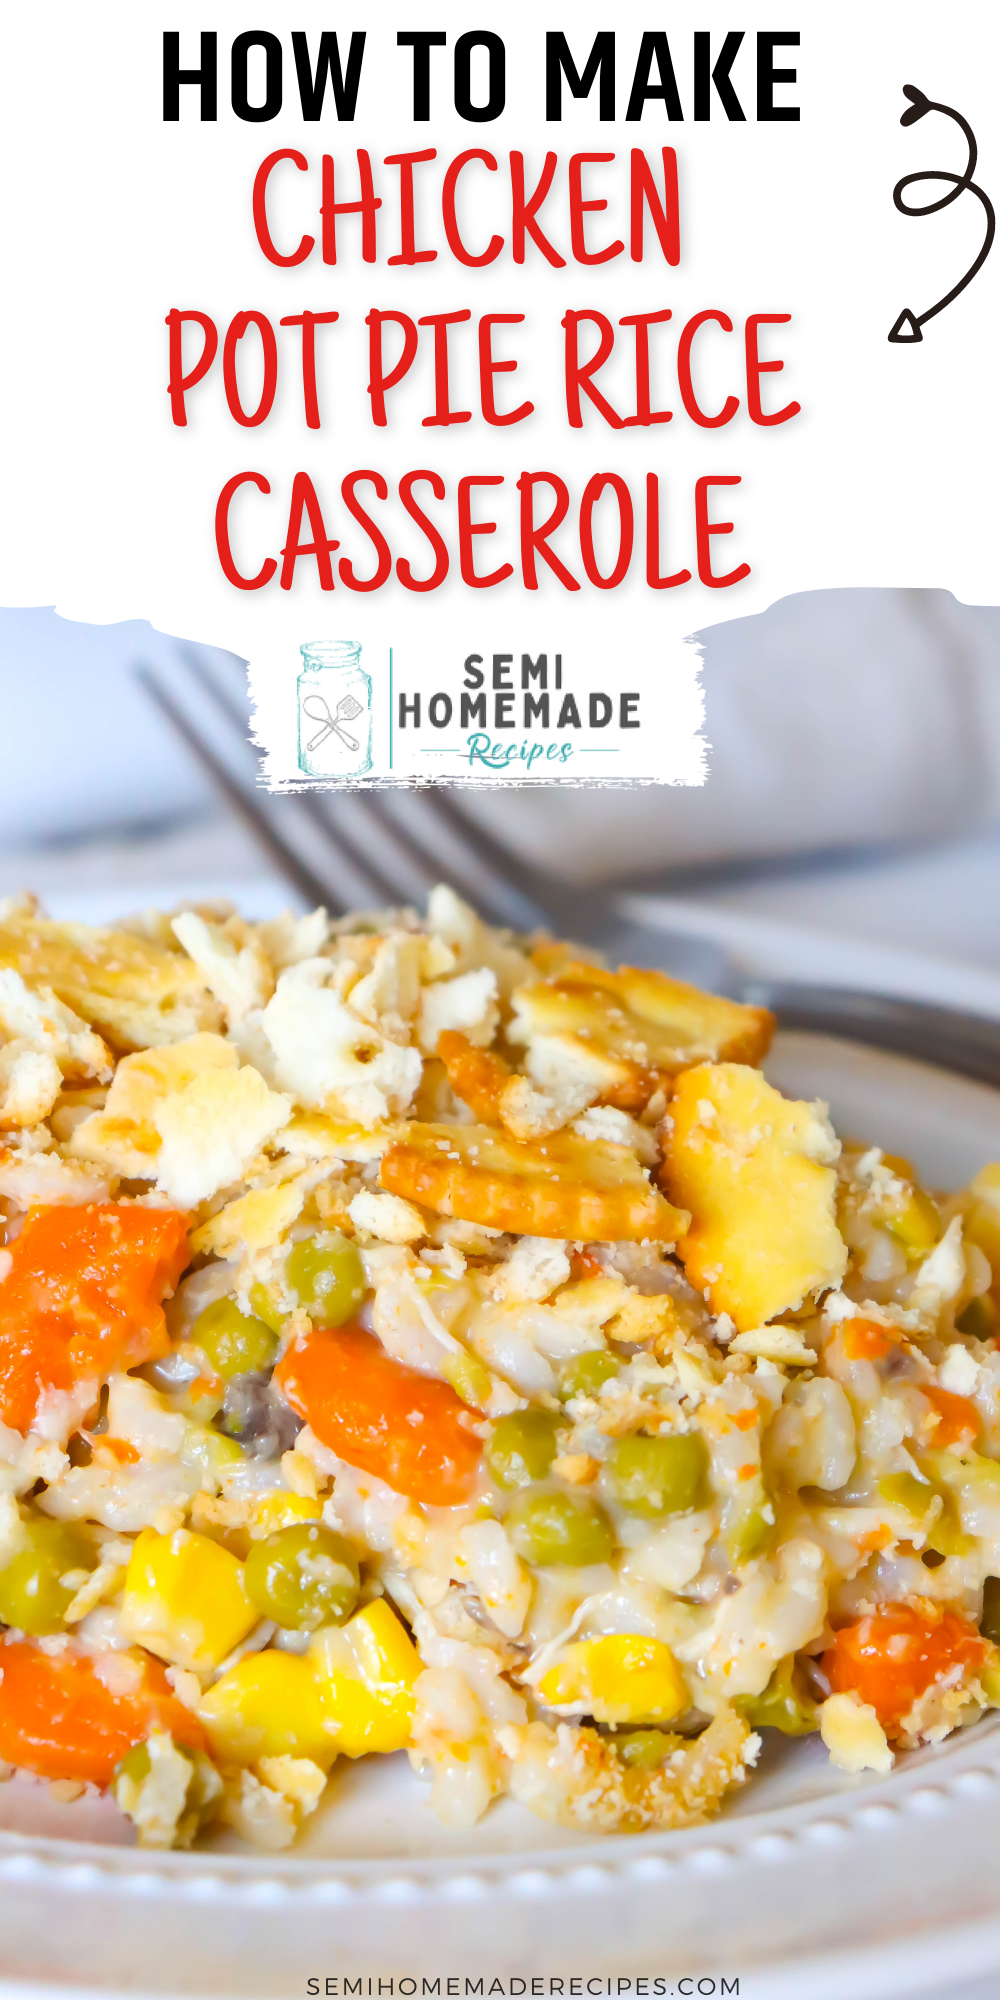 Chicken Pot Pie Rice Casserole is a great and easy recipe that cooks in 30 minutes and has all of the great flavors of a southern homemade Chicken Pot Pie!